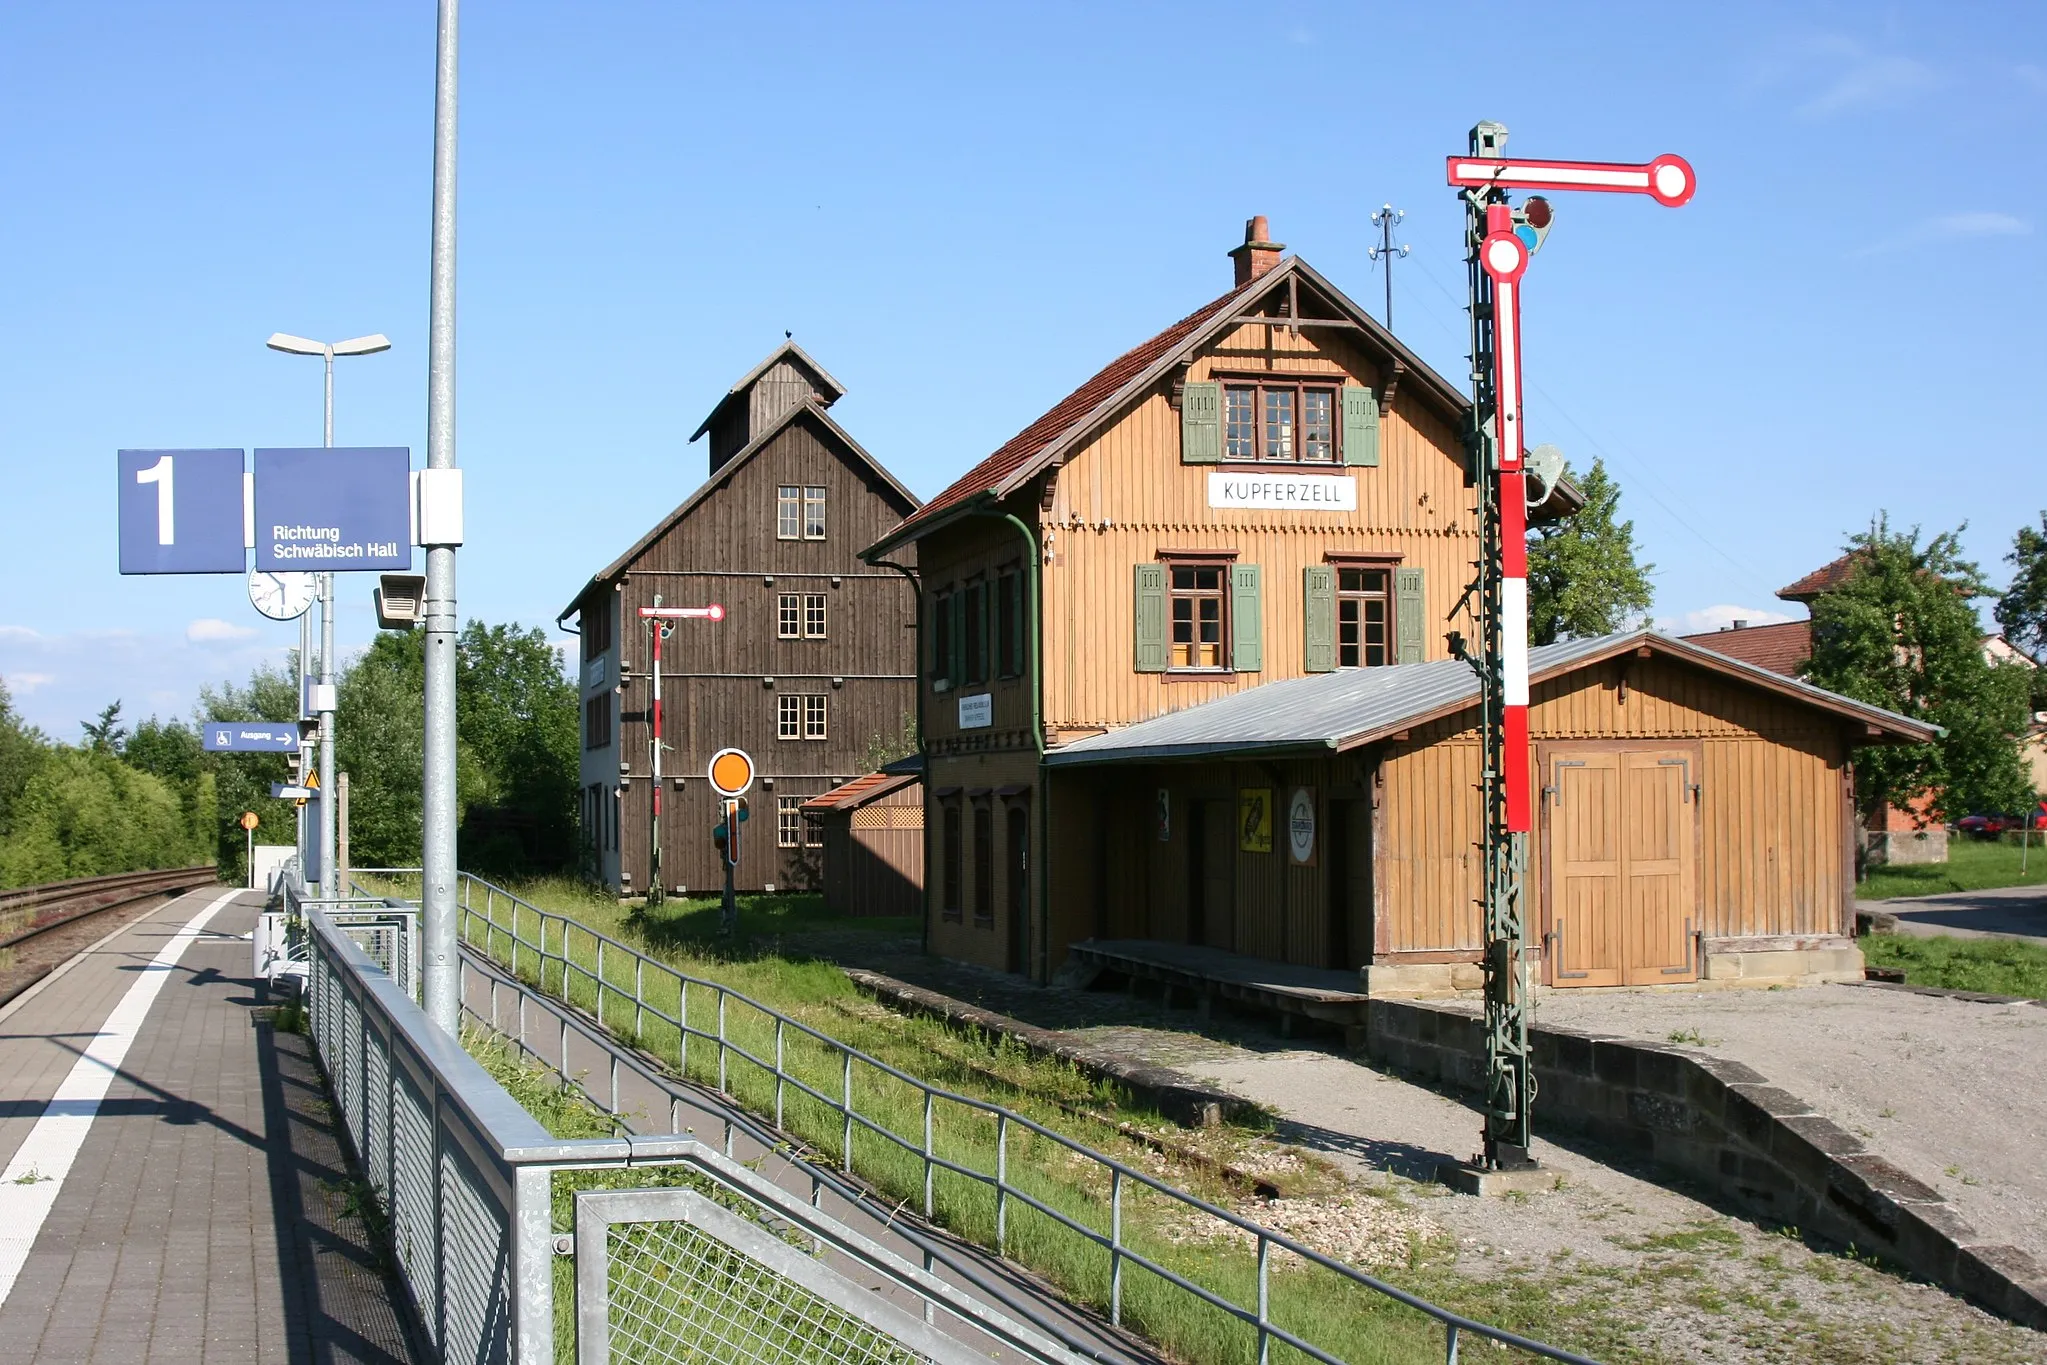 Photo showing: The old train station of Kupferzell in the Open Air Museum Wackershofen